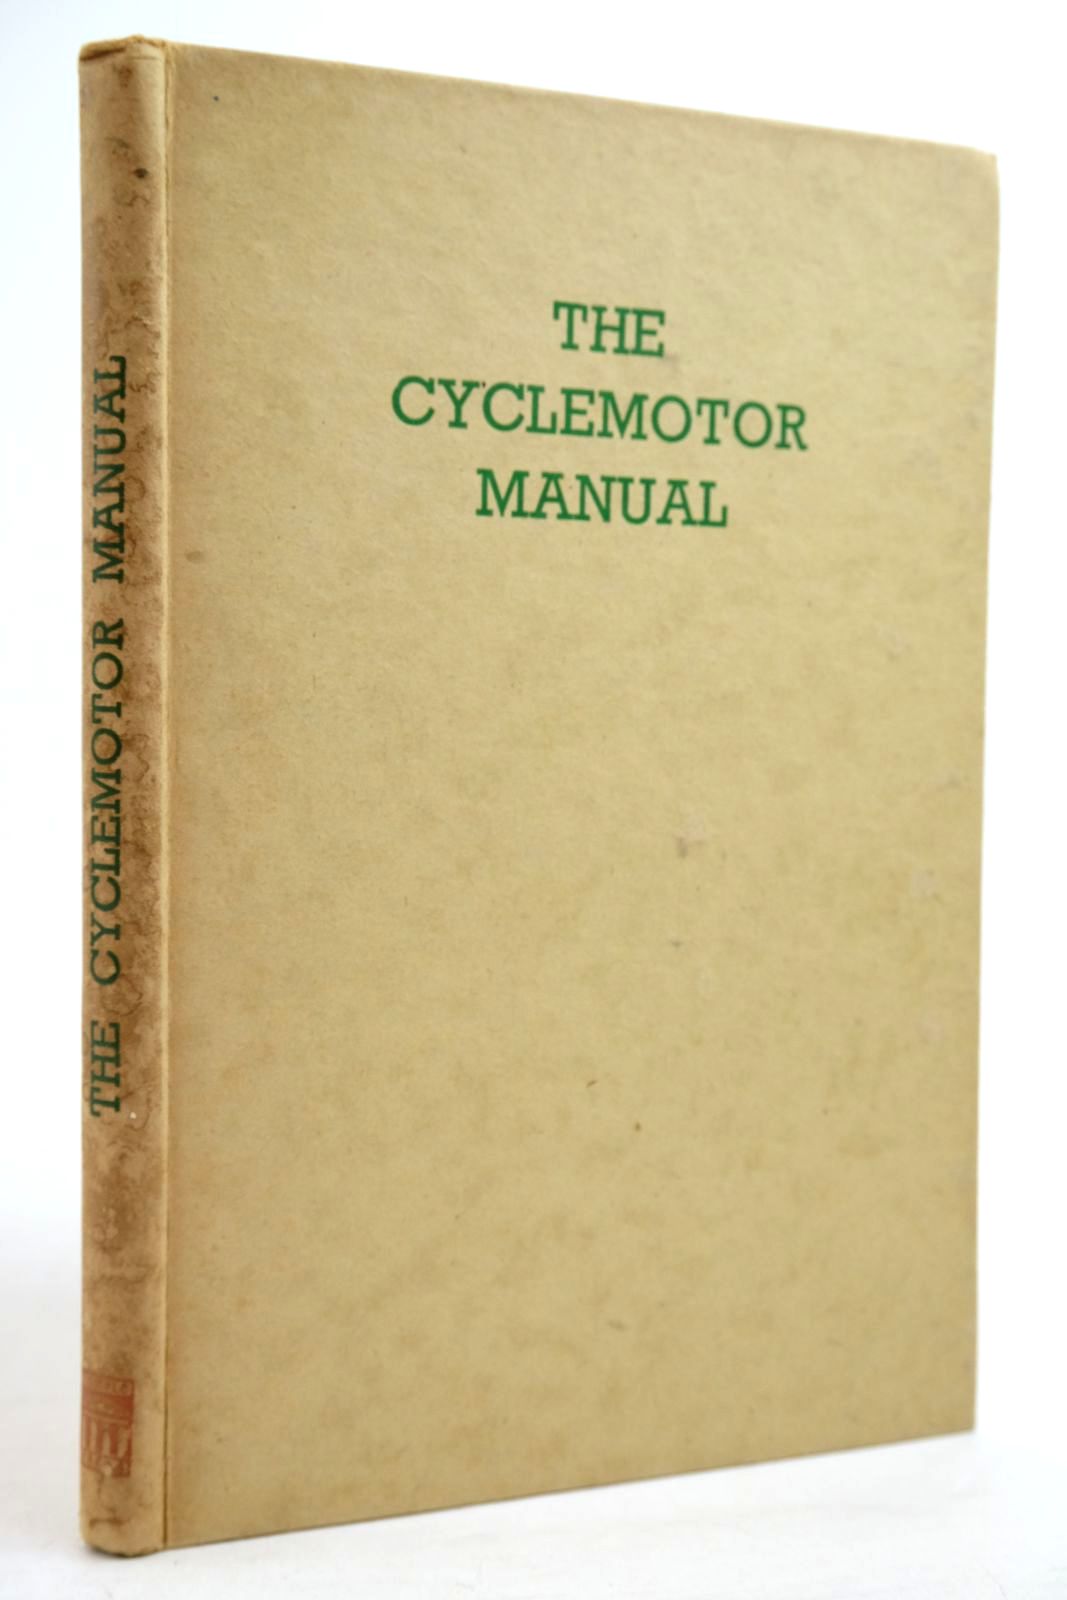 Photo of THE CYCLEMOTOR MANUAL published by Temple Press Limited (STOCK CODE: 2134618)  for sale by Stella & Rose's Books